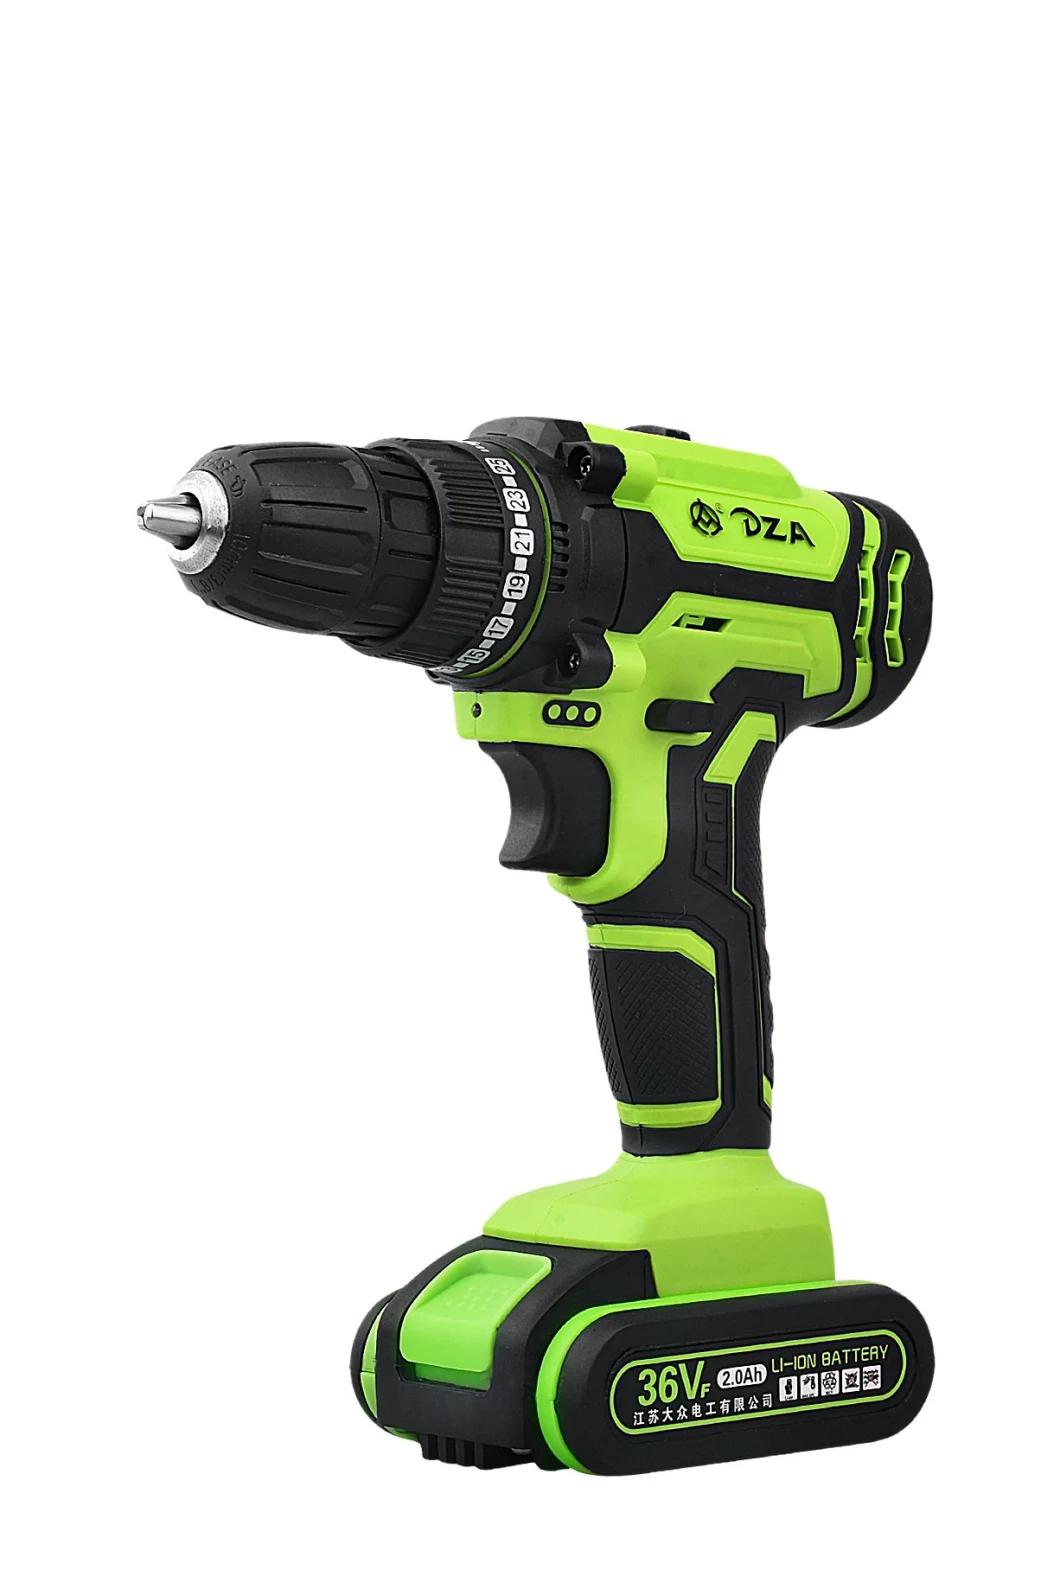 Household DIY Lithium Power Cordless Drill Kit with 10mm Keyless Chuck